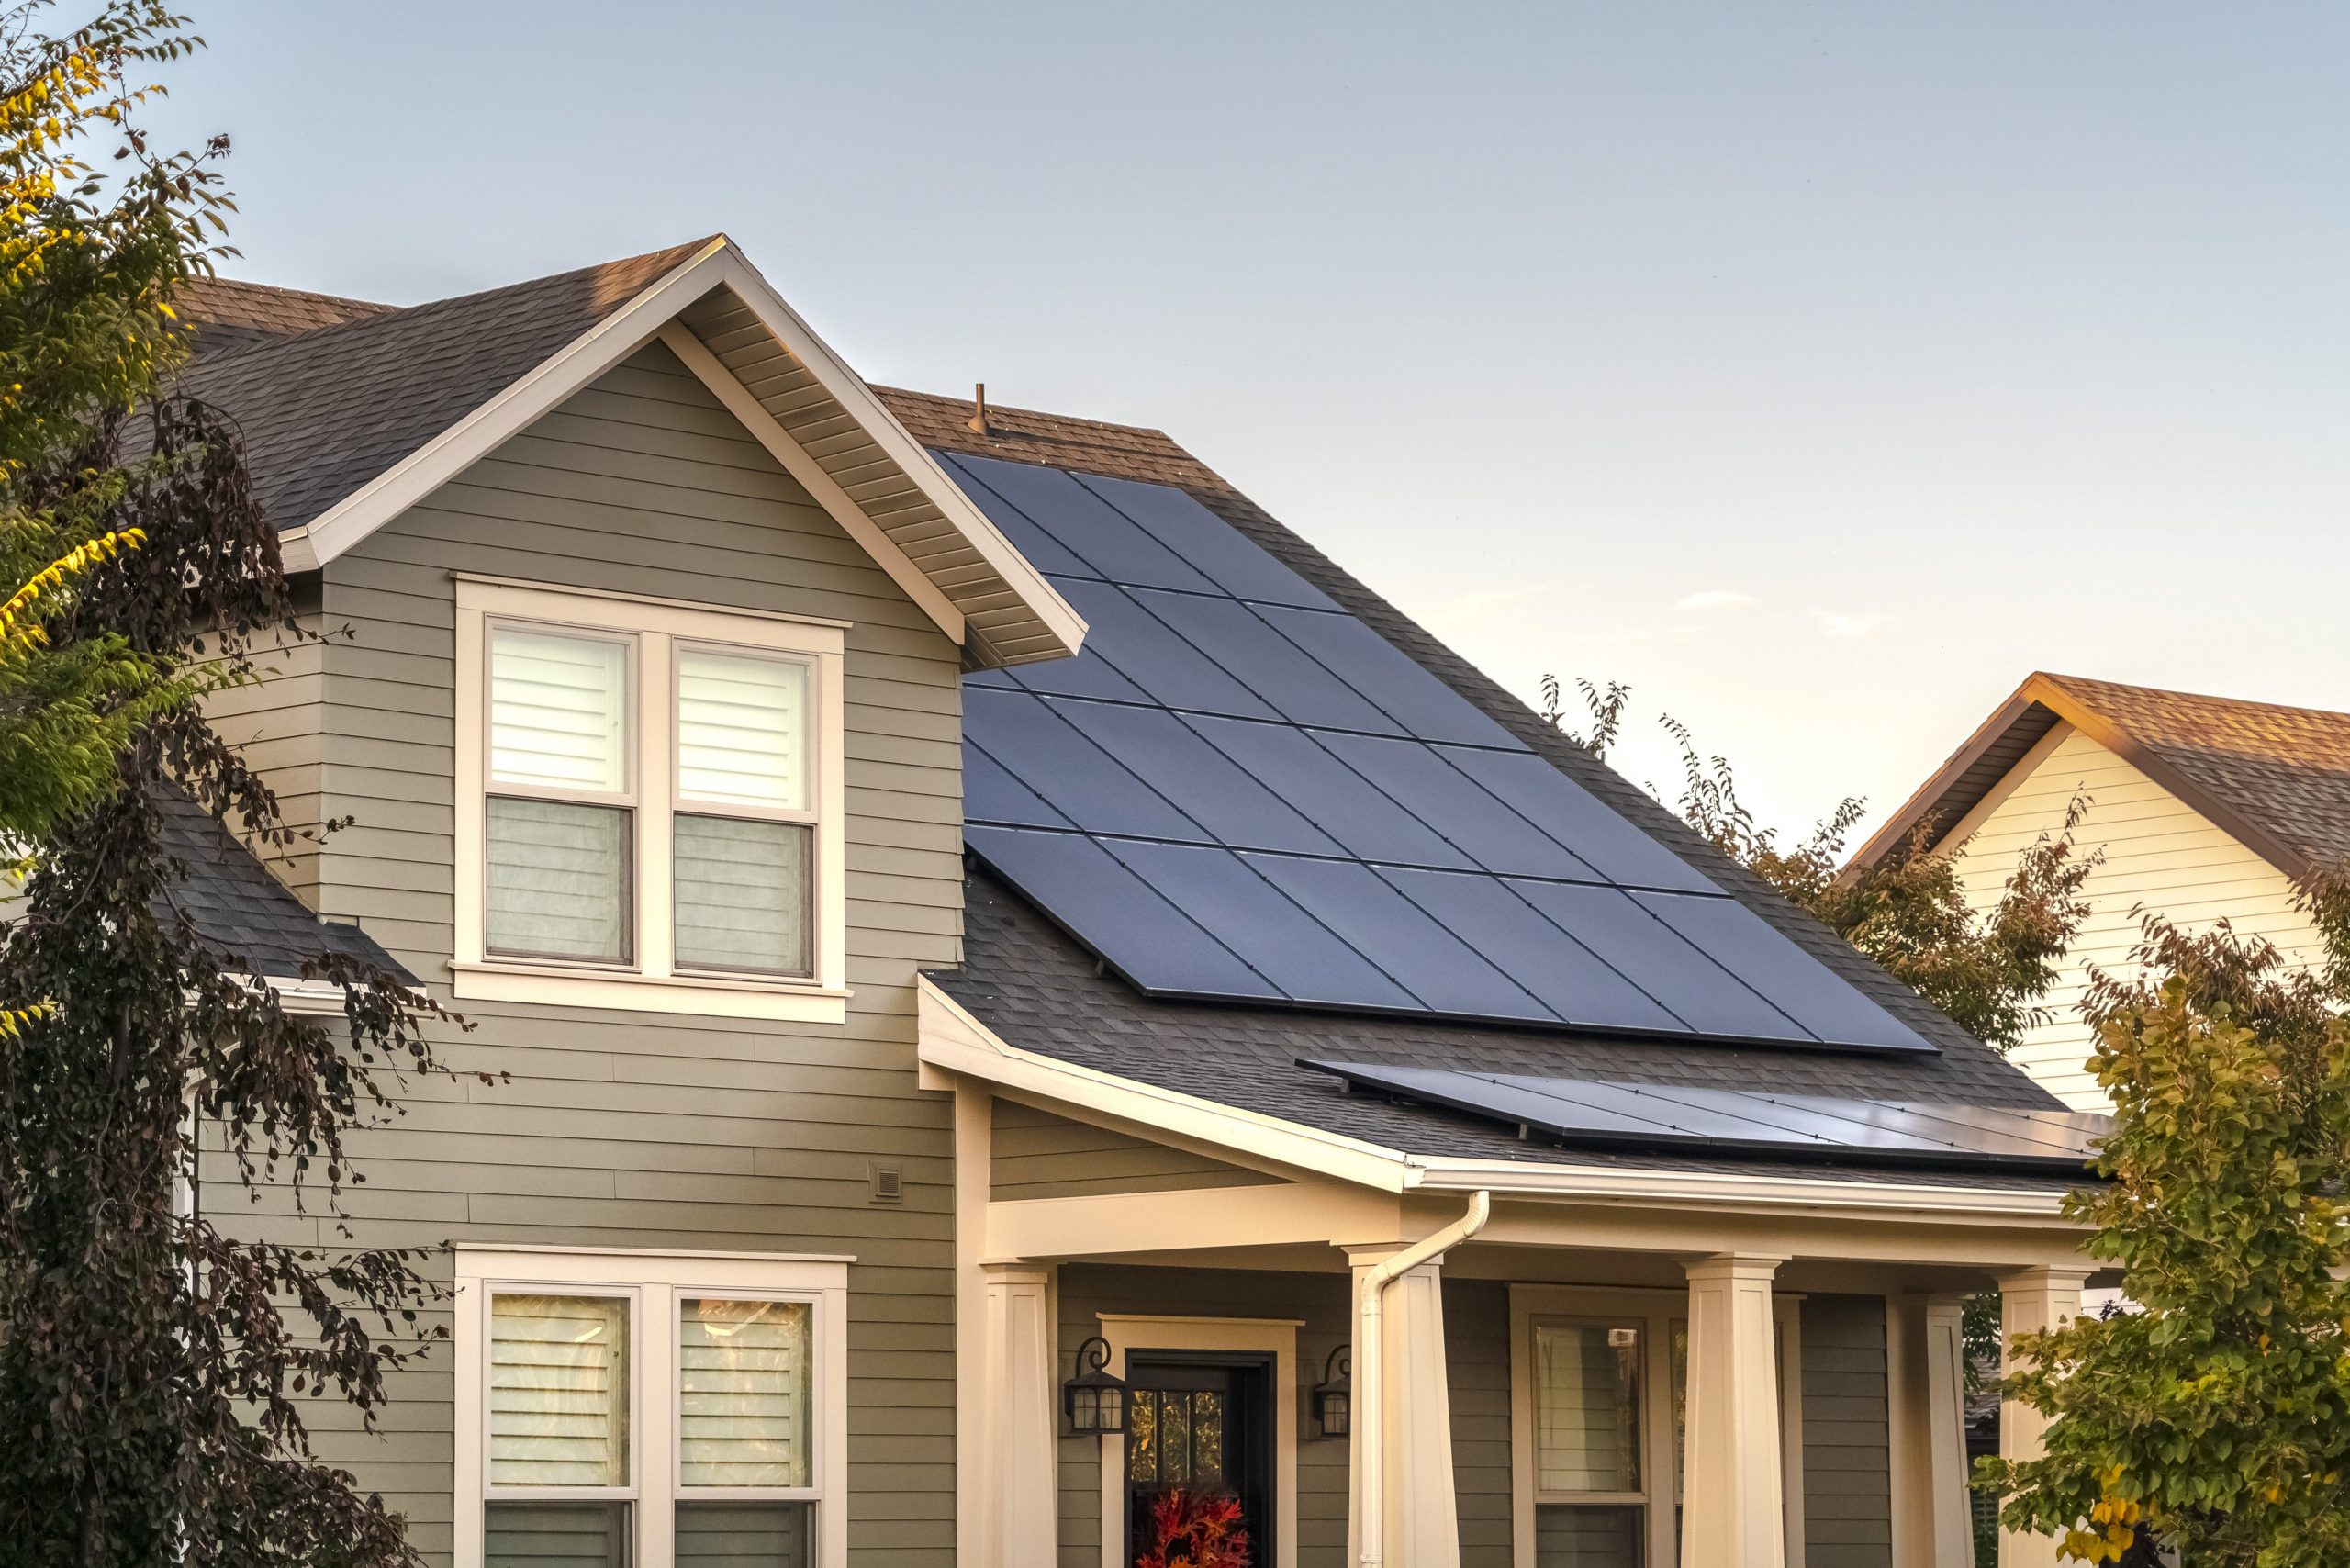 What You Need to Know About Adding Solar Panels to Your Home